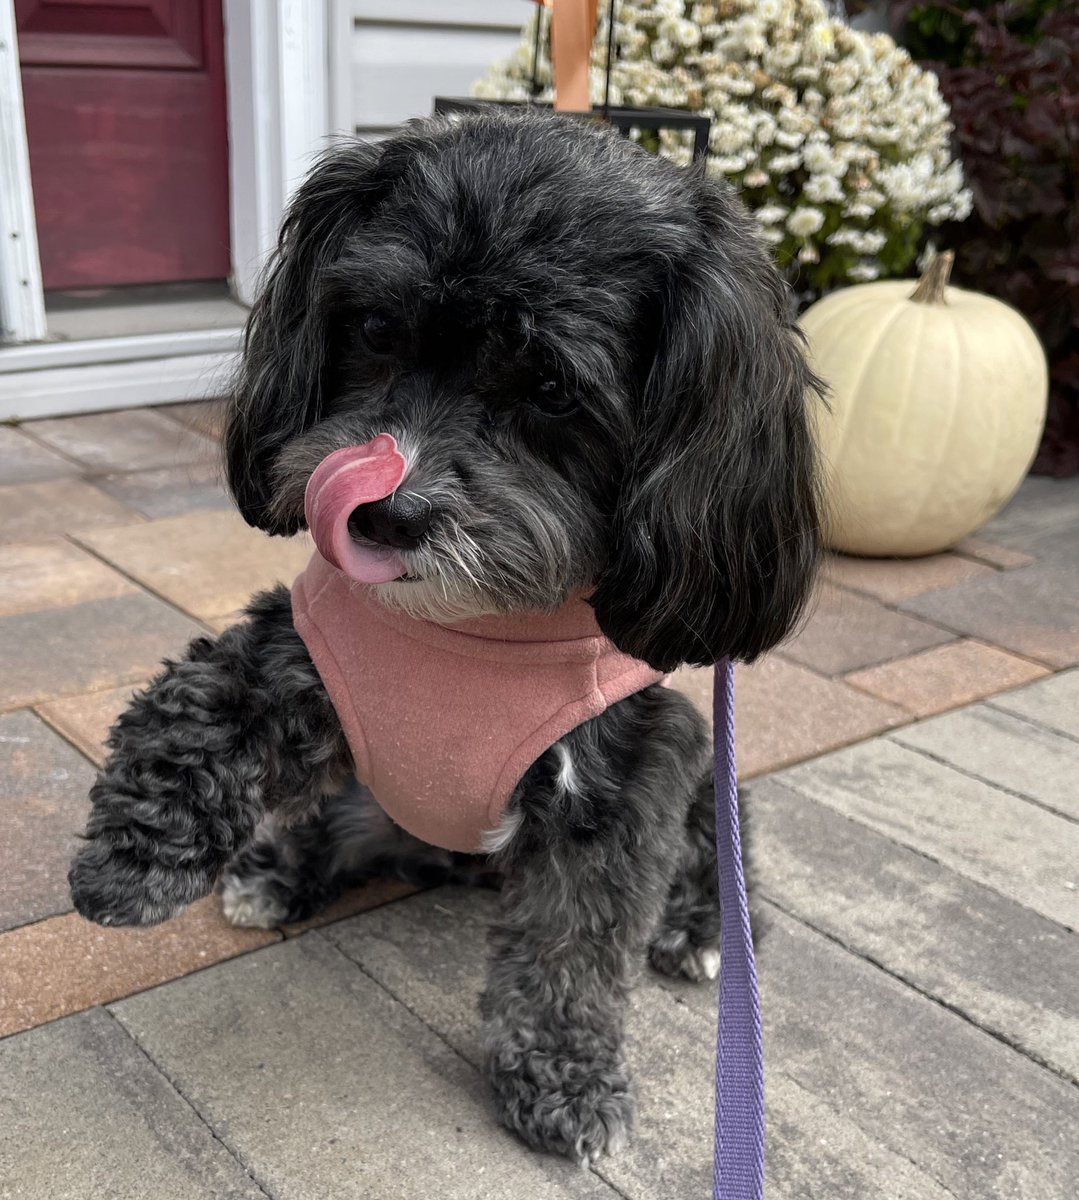 Dis is me spectacular “one paw up wif curly tongue” move for #TongueOutTuesday Hope you like it. It was hard work. 🐾👅 #tot #dogsoftwitter #DogsonTwitter #dogs #TuesdayMotivaton